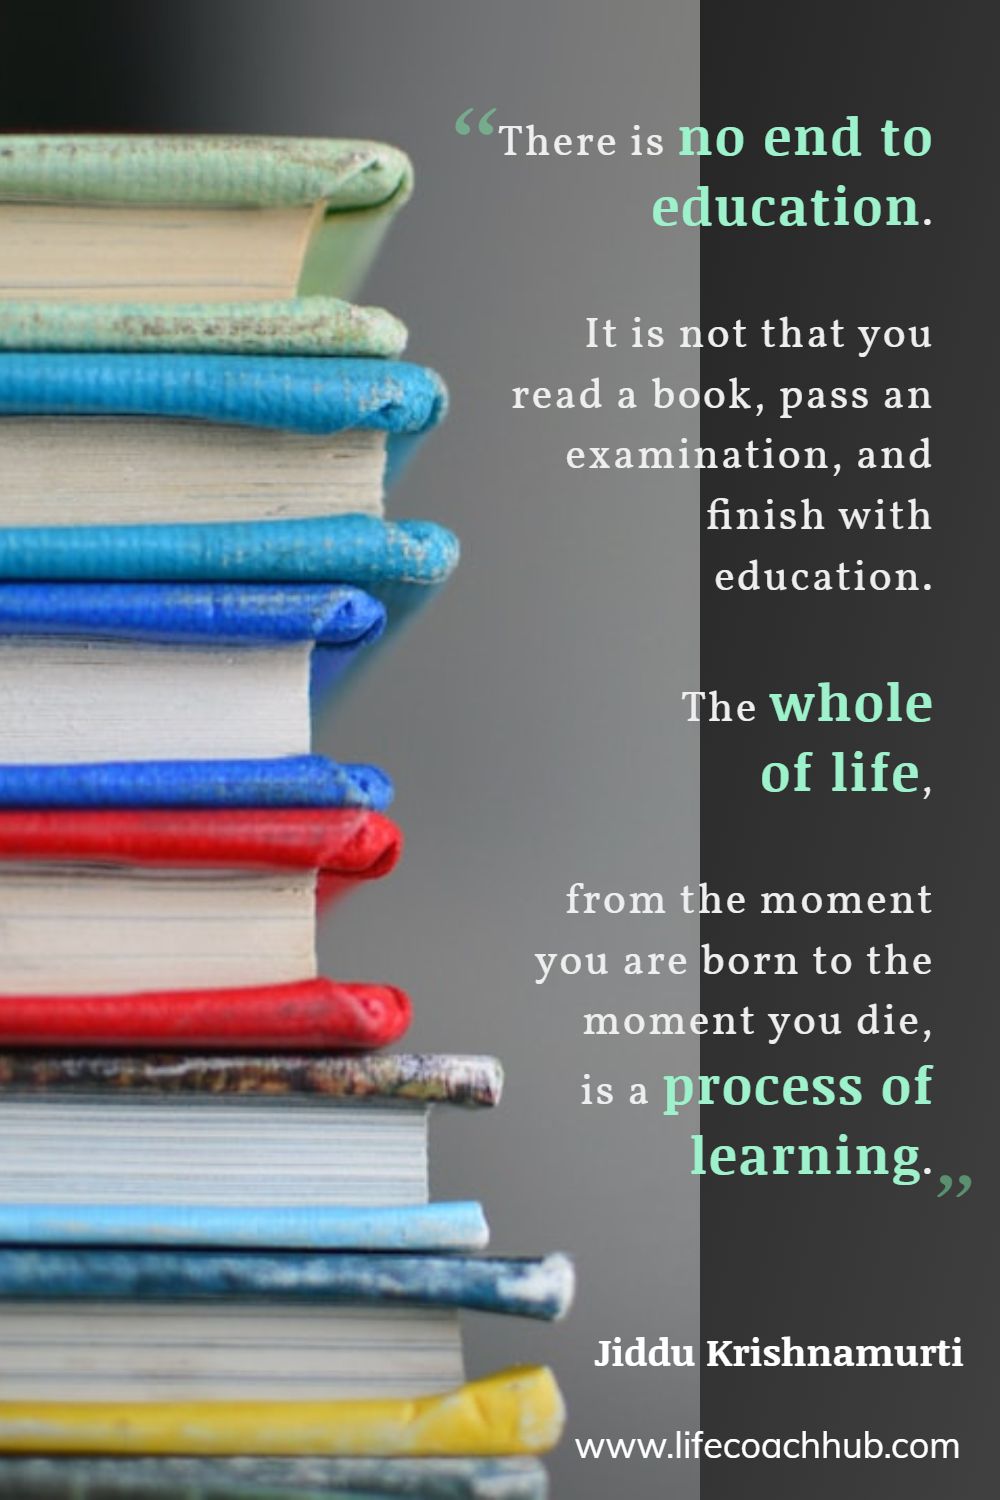 There is no end to education. It is not that you read a book, pass an examination, and finish with education. The whole of life, from the moment you are born to the moment you die, is a process of learning. Jiddu Krishnamurti Coaching Quote